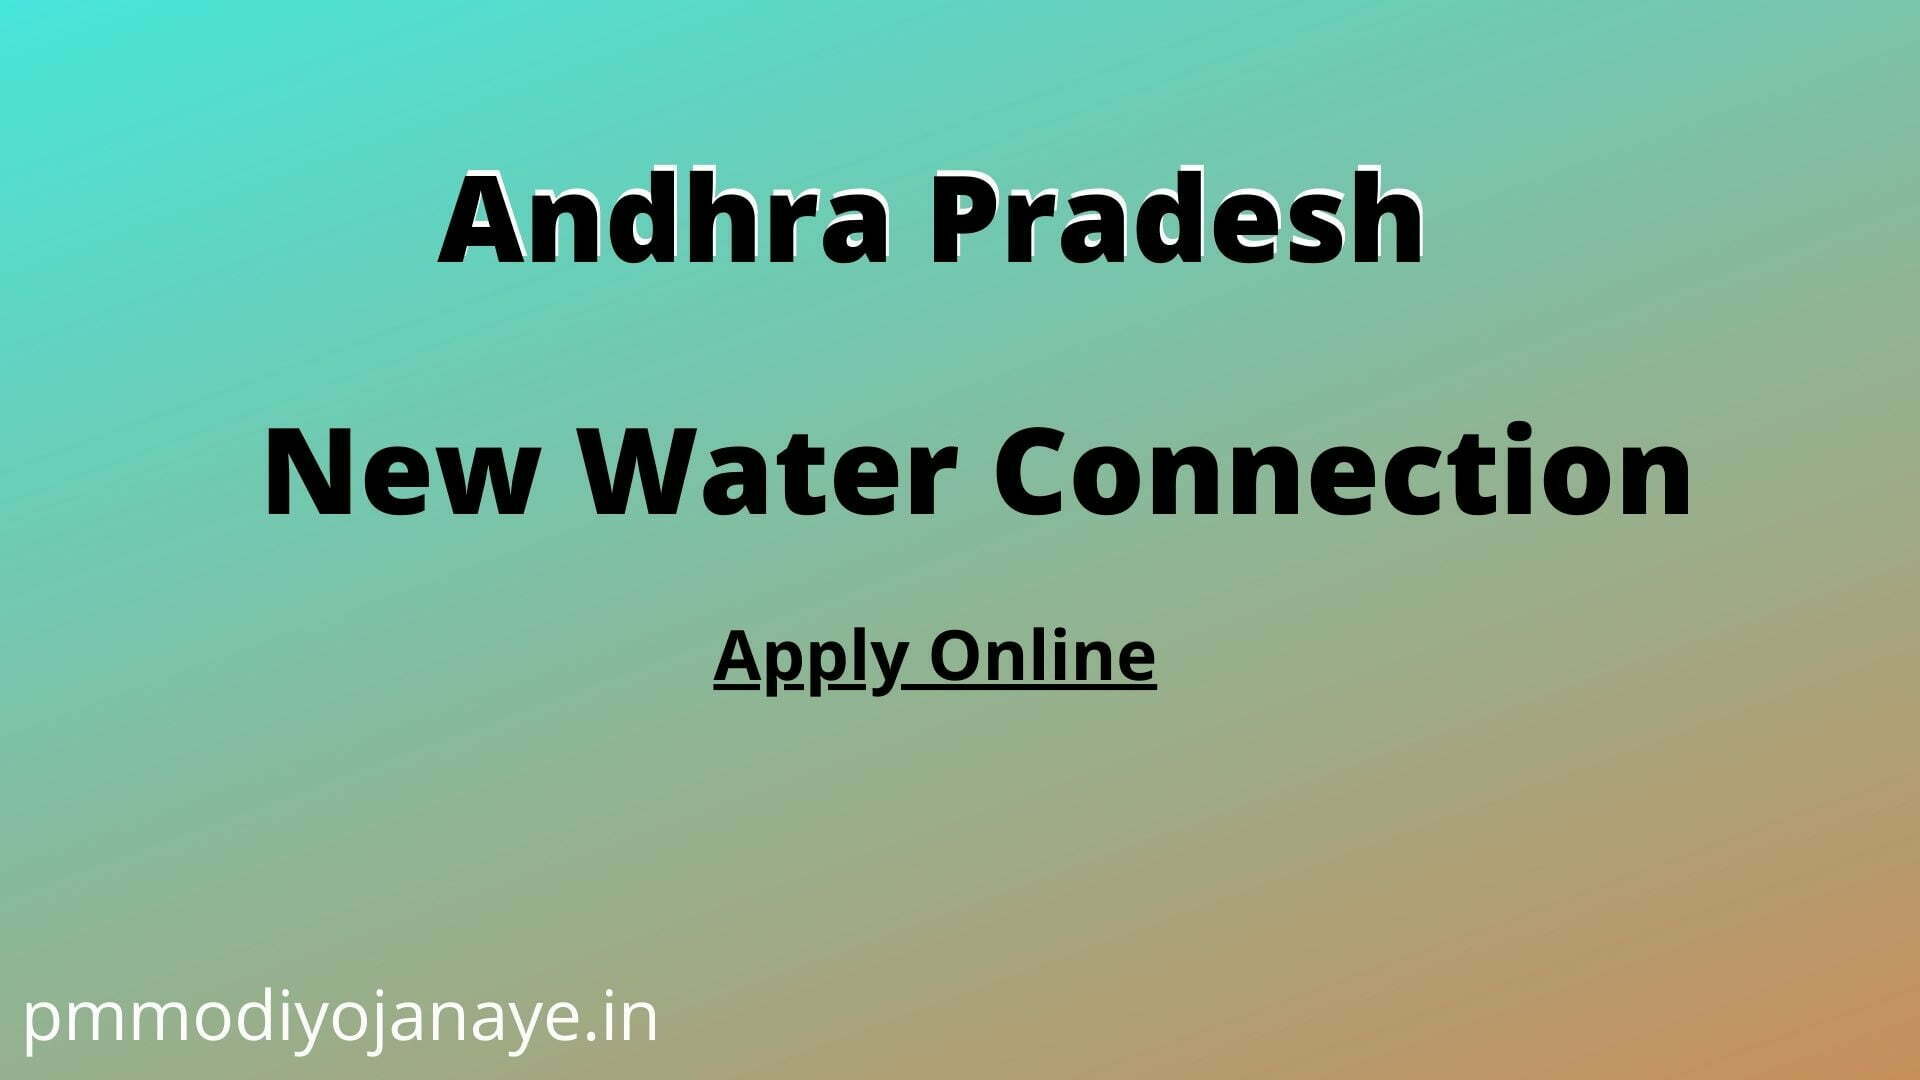 Andhra Pradesh new water connection